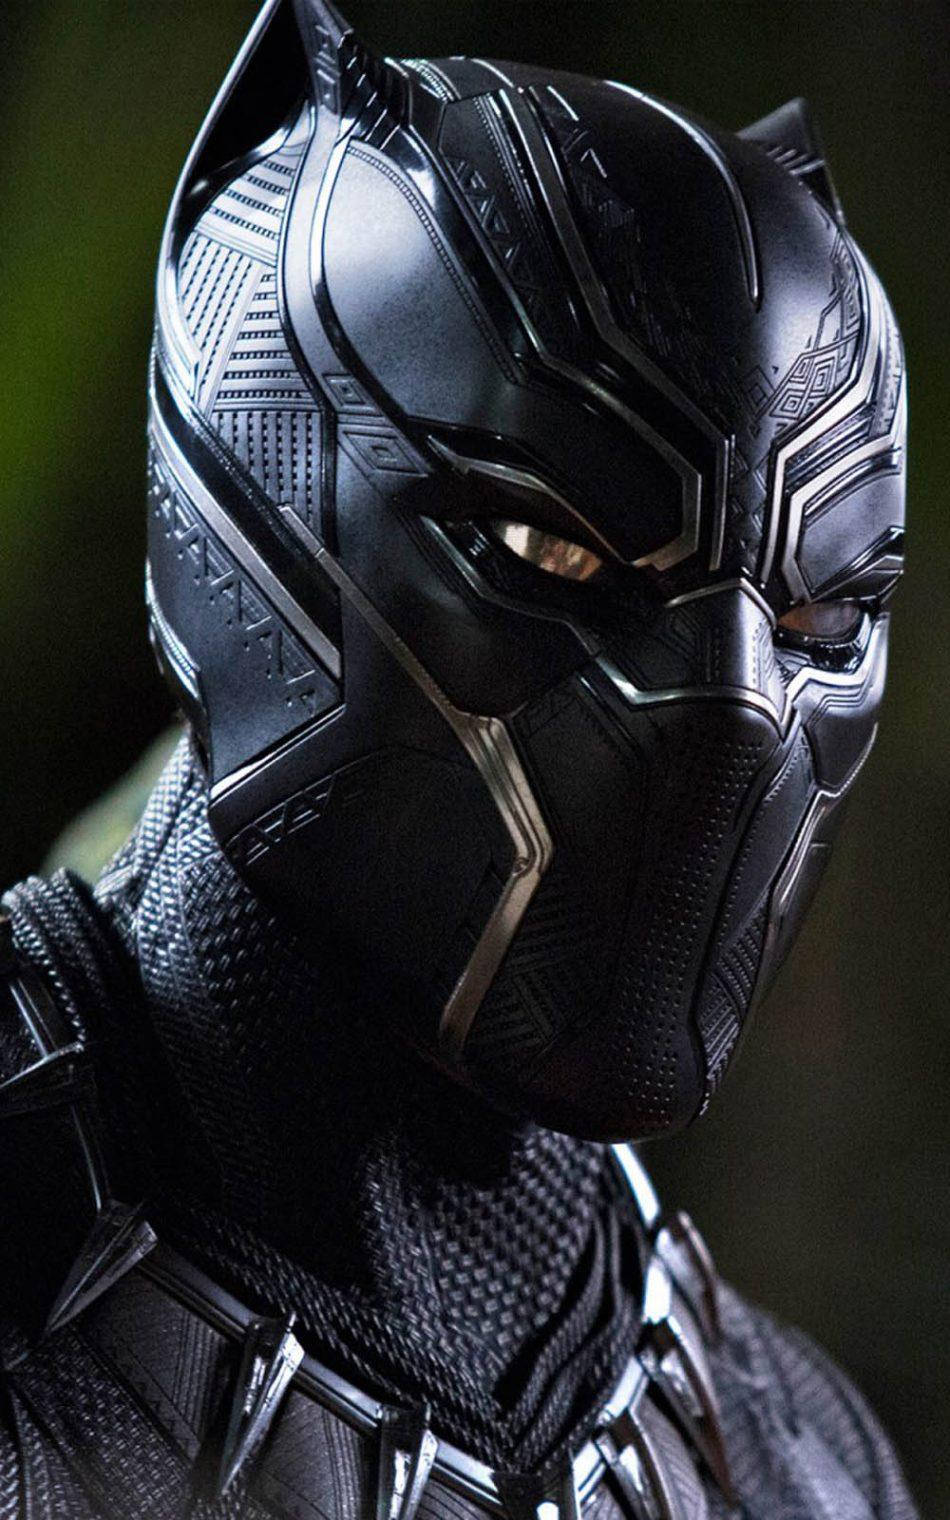 Fiery Eyes - Prowess Of The Black Panther Android Wallpaper